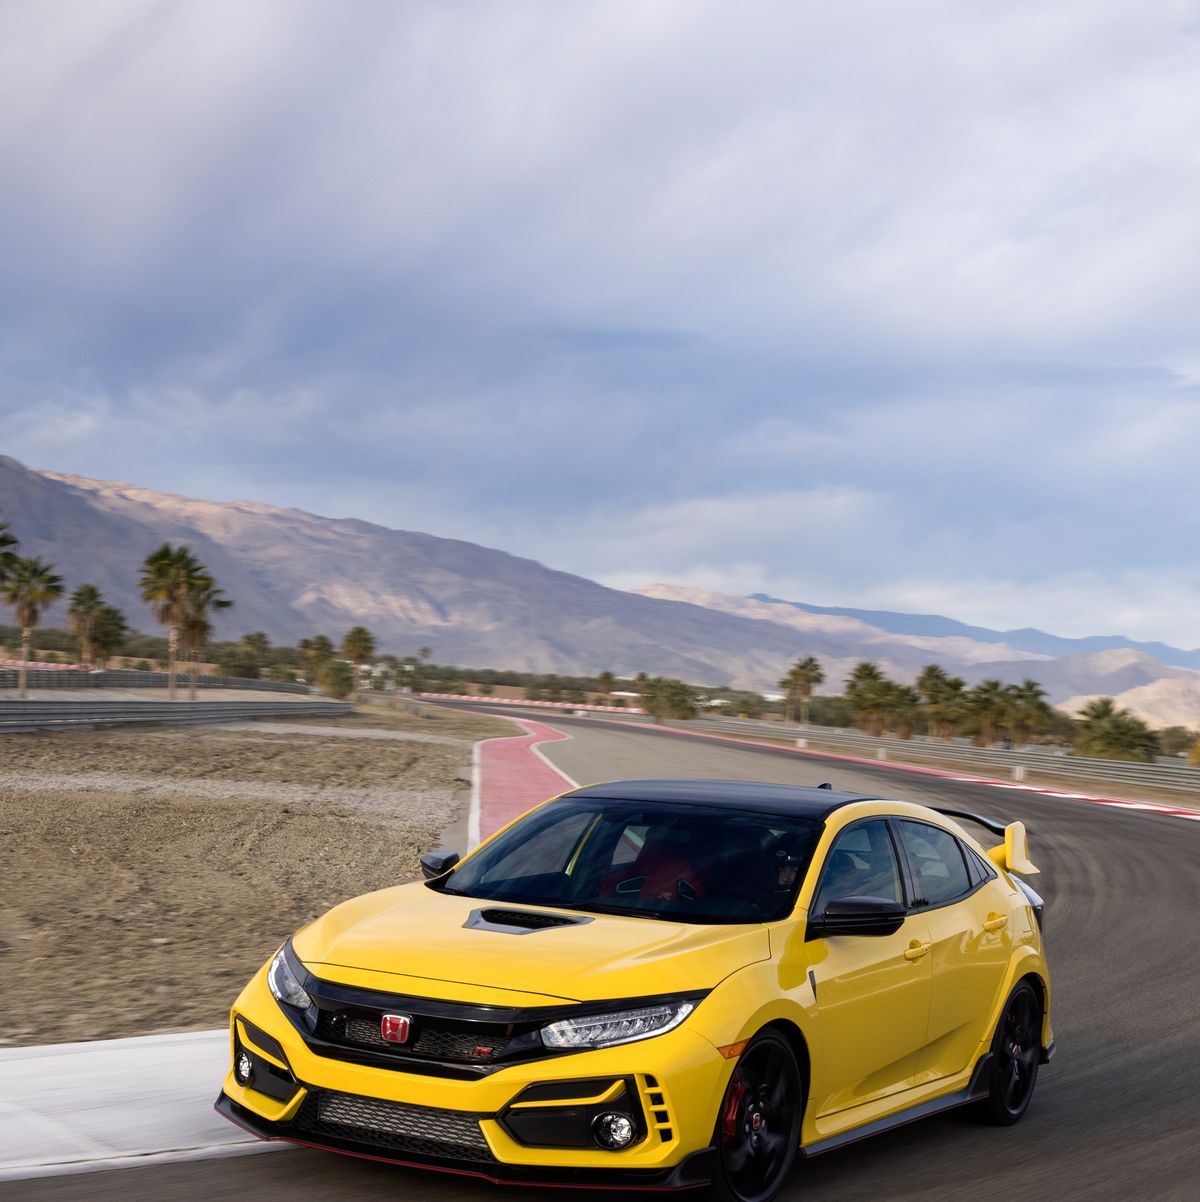 Honda Civic Type R: See The Changes Side By Side